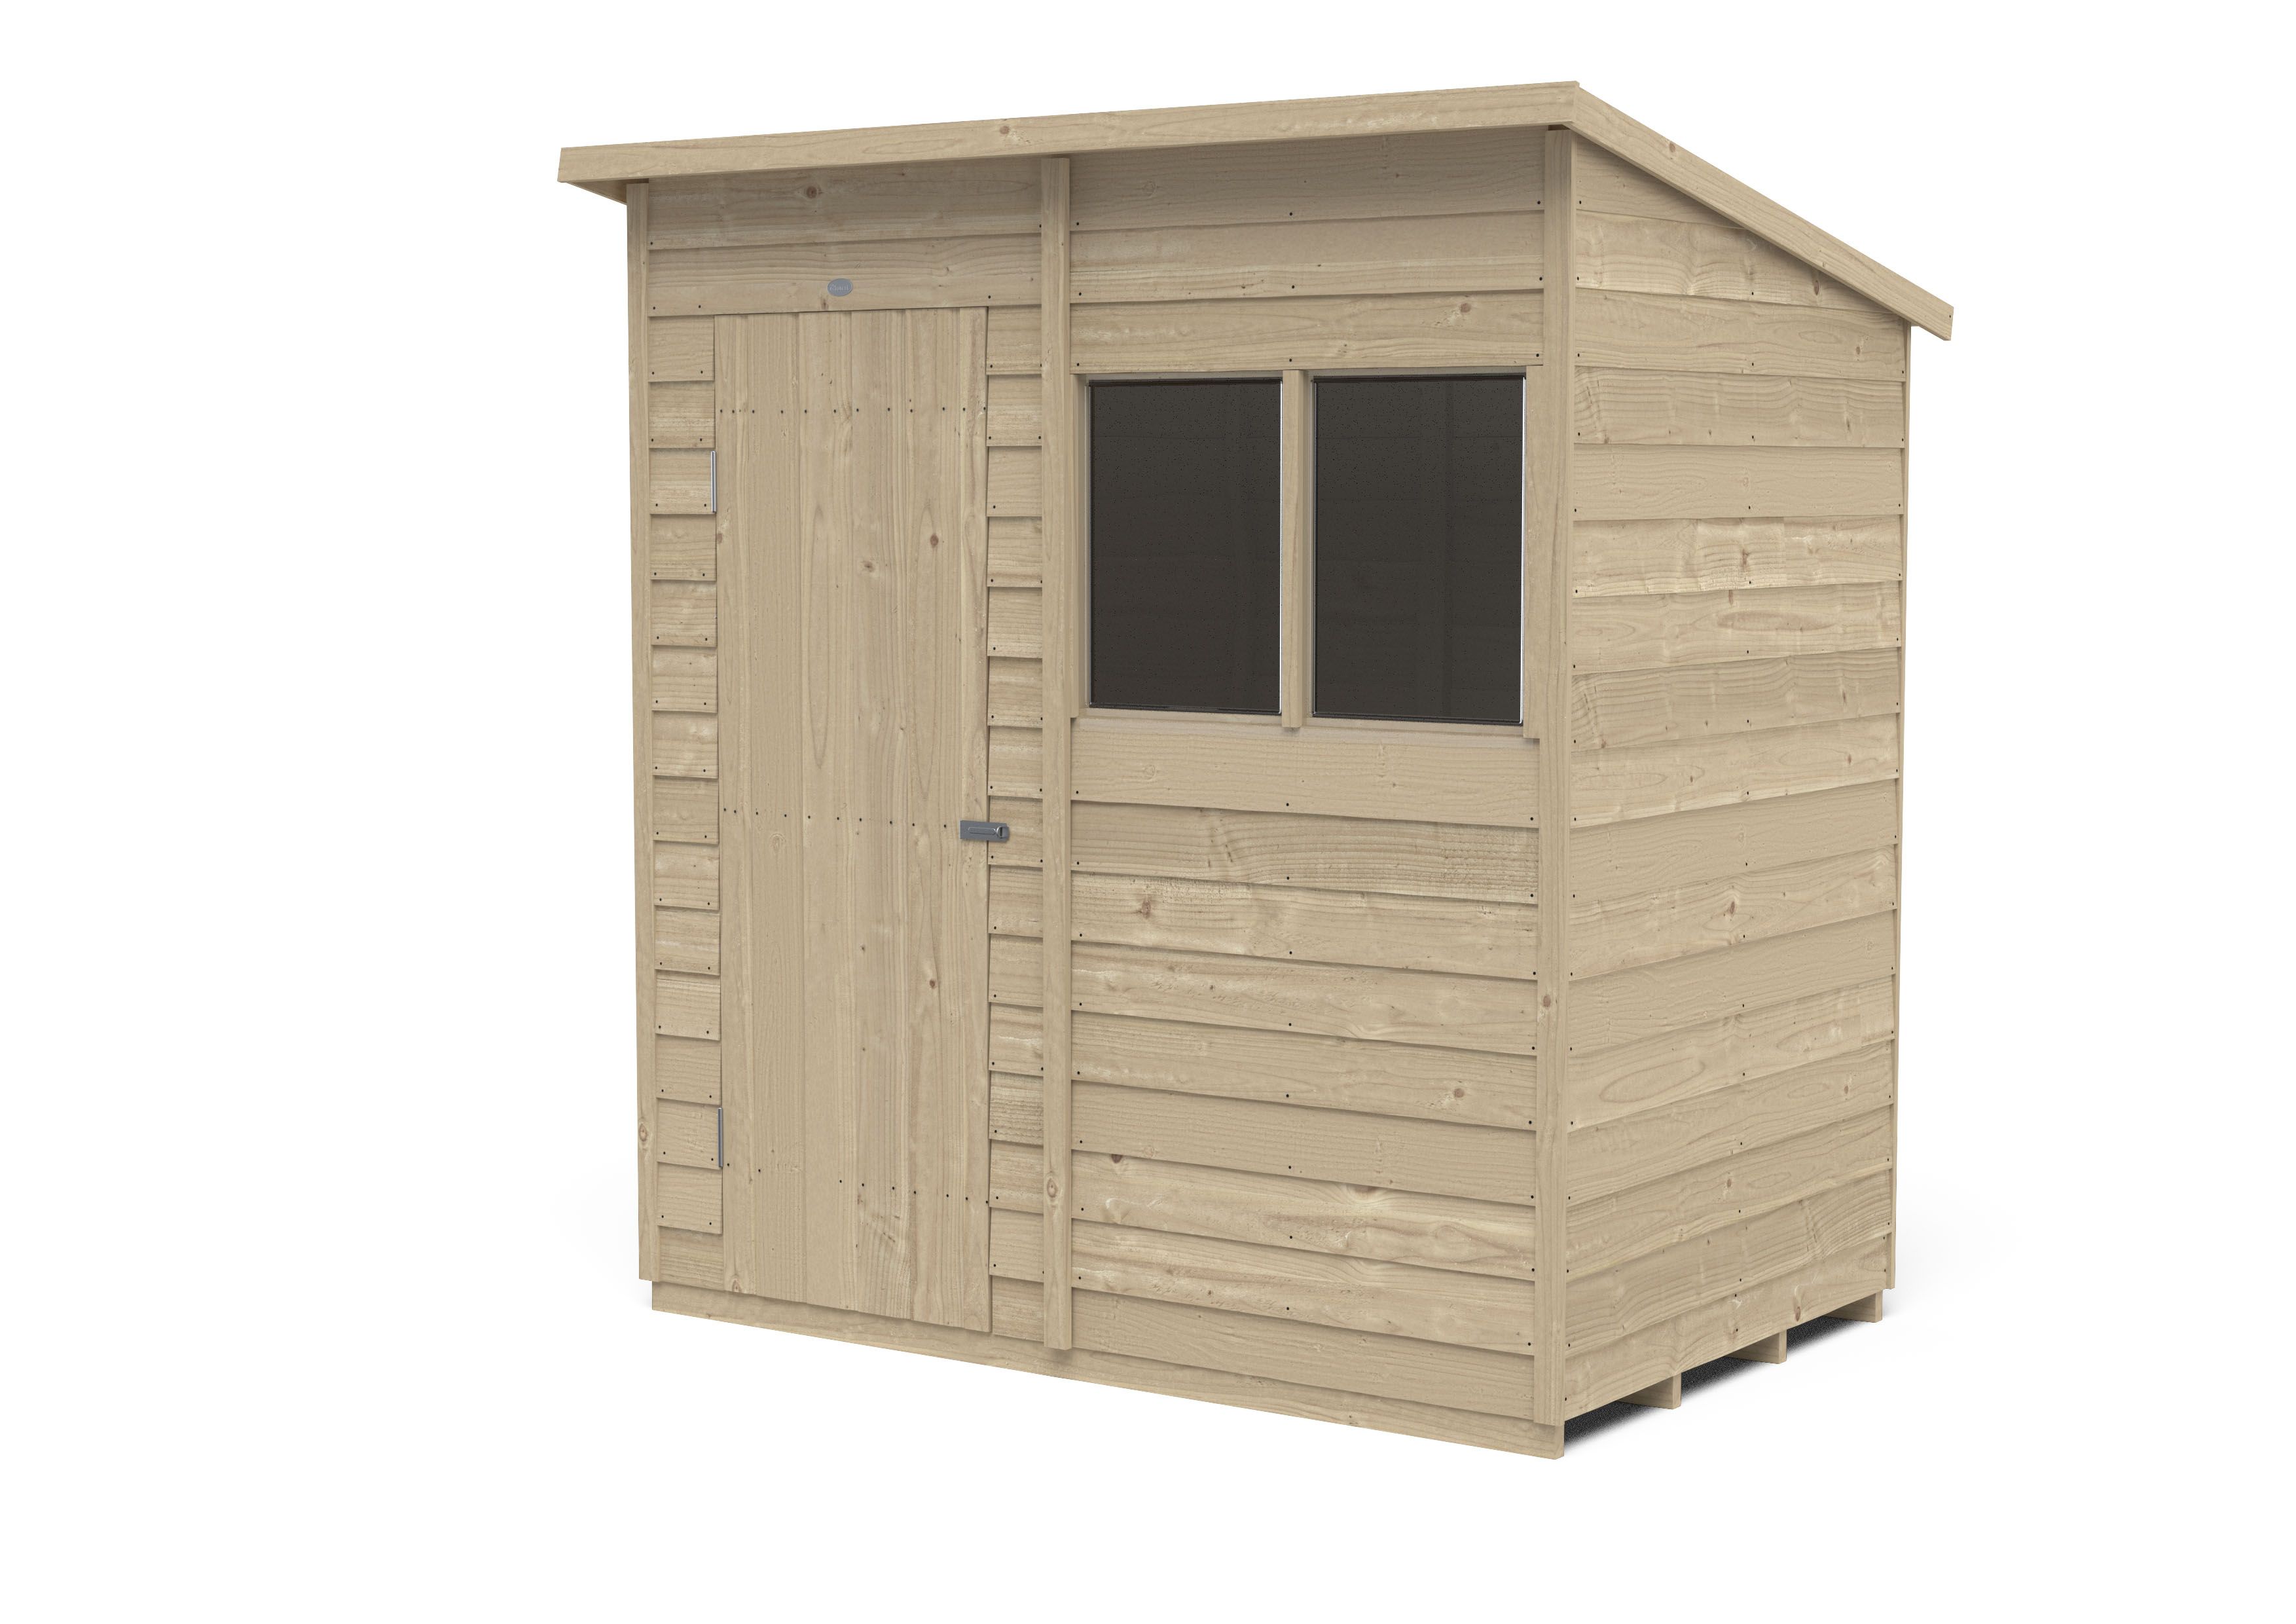 Forest Garden Overlap 6x4 ft Pent Wooden Pressure treated Shed with floor & 2 windows - Assembly service included